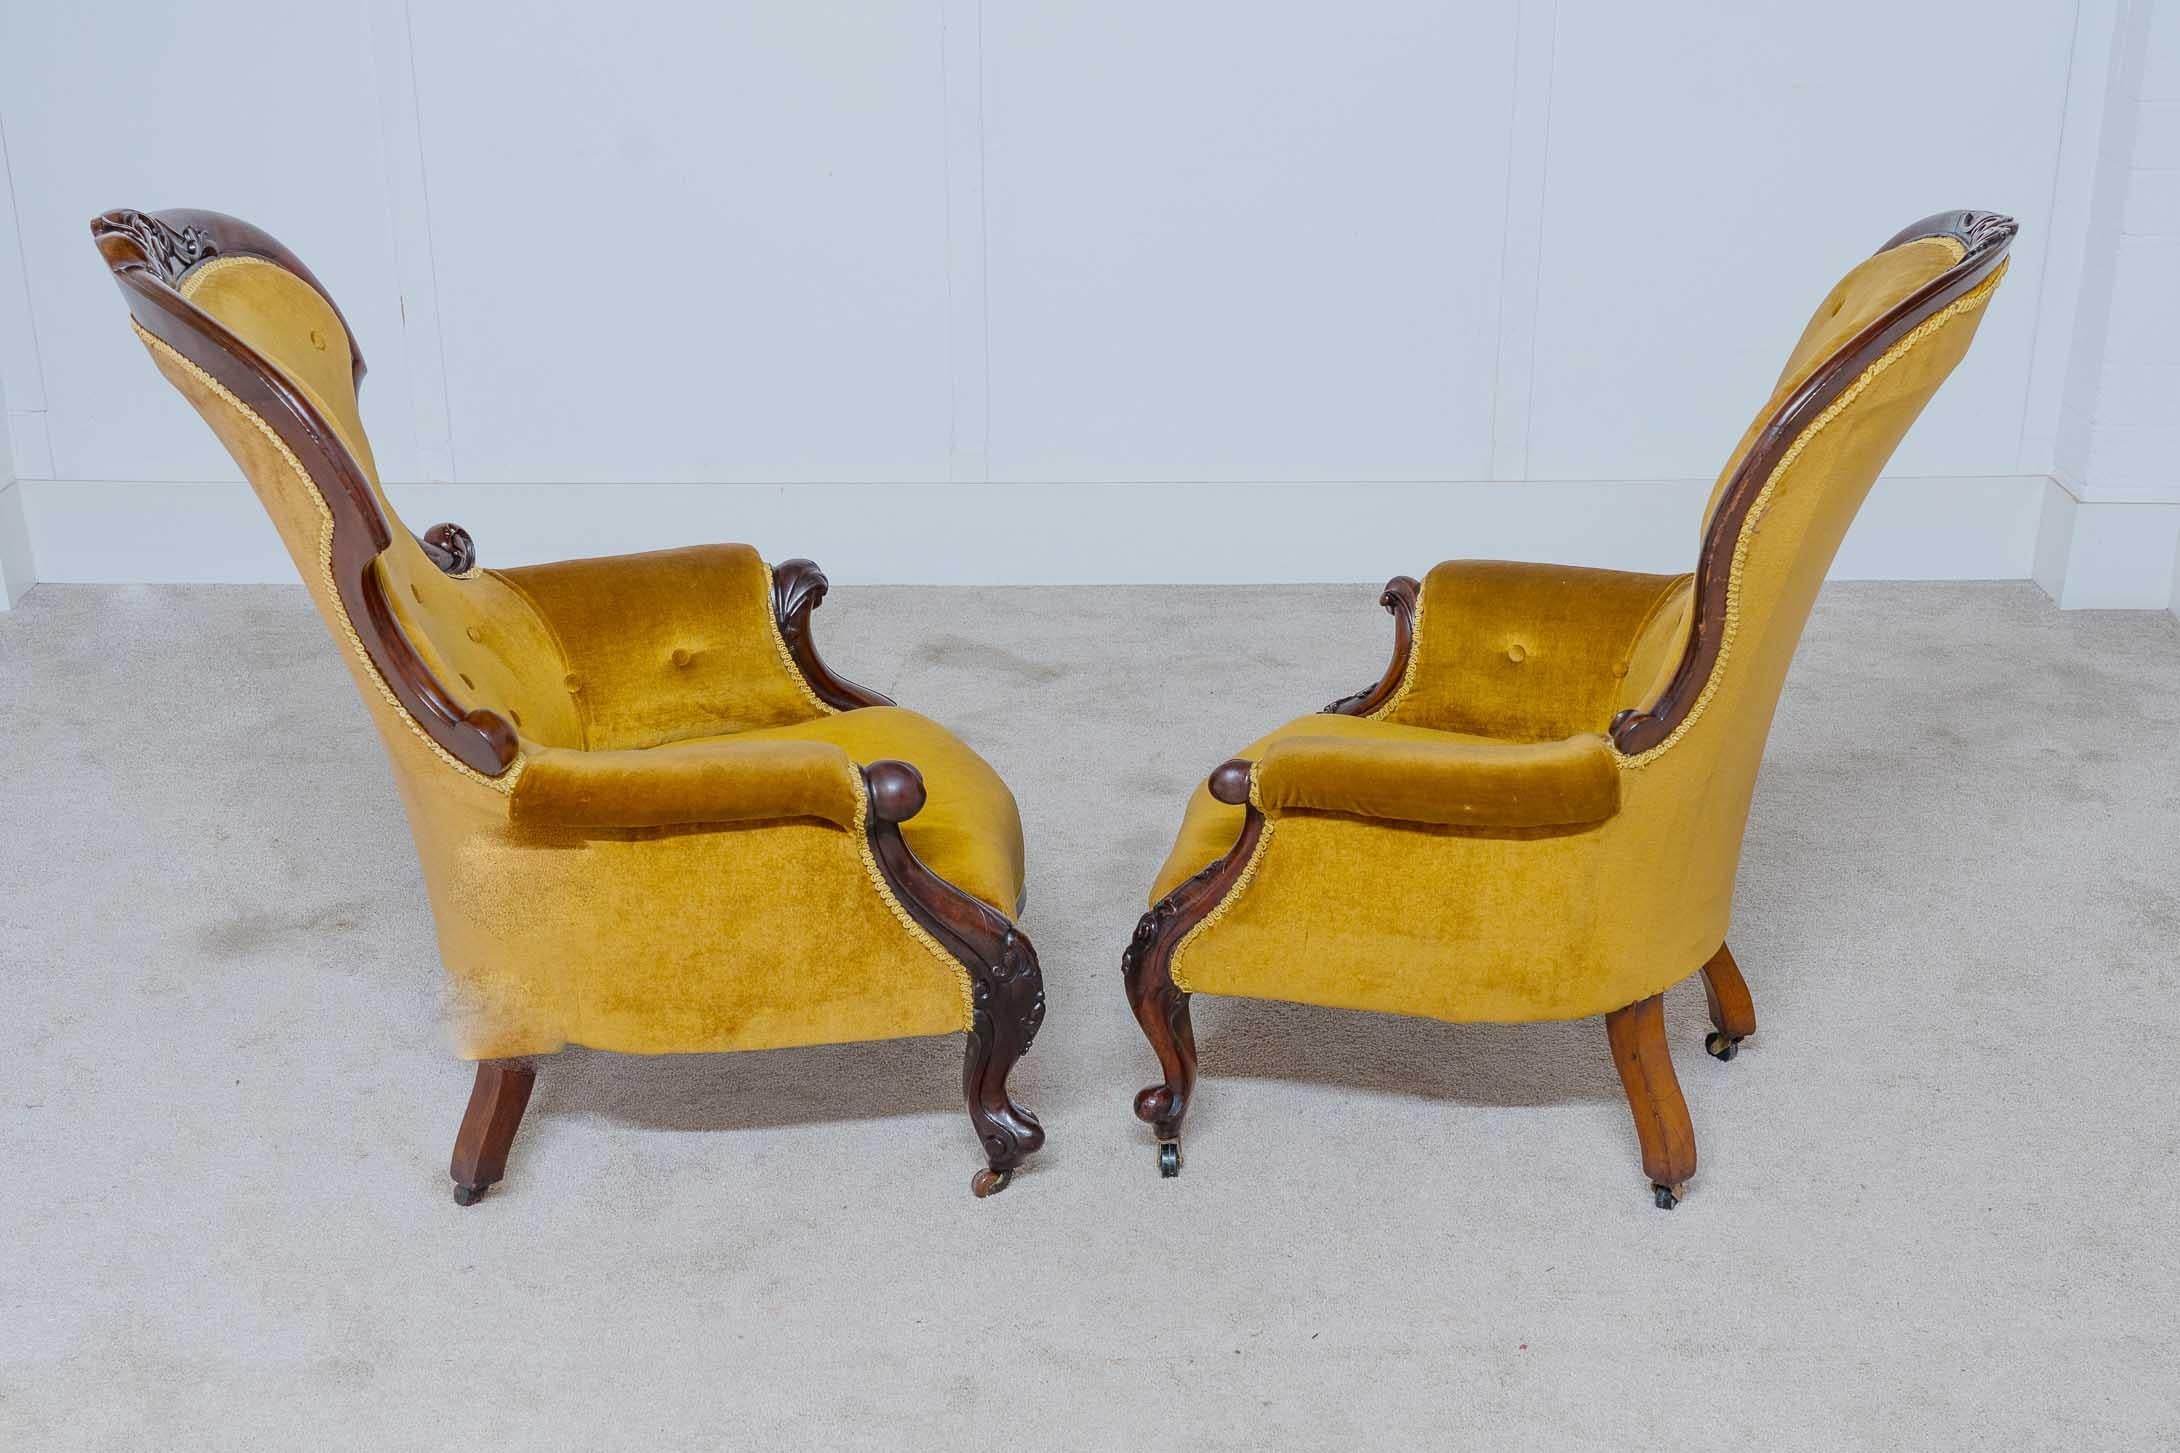 Gorgeous pair of Victorian arm chairs with distinctive balloon backs
Circa 1880 on this classic pair of Victorian saloon chairs
Would be a his and hers set as one design is slighly different
Very comfortable with cushioned arms, sides, seat and